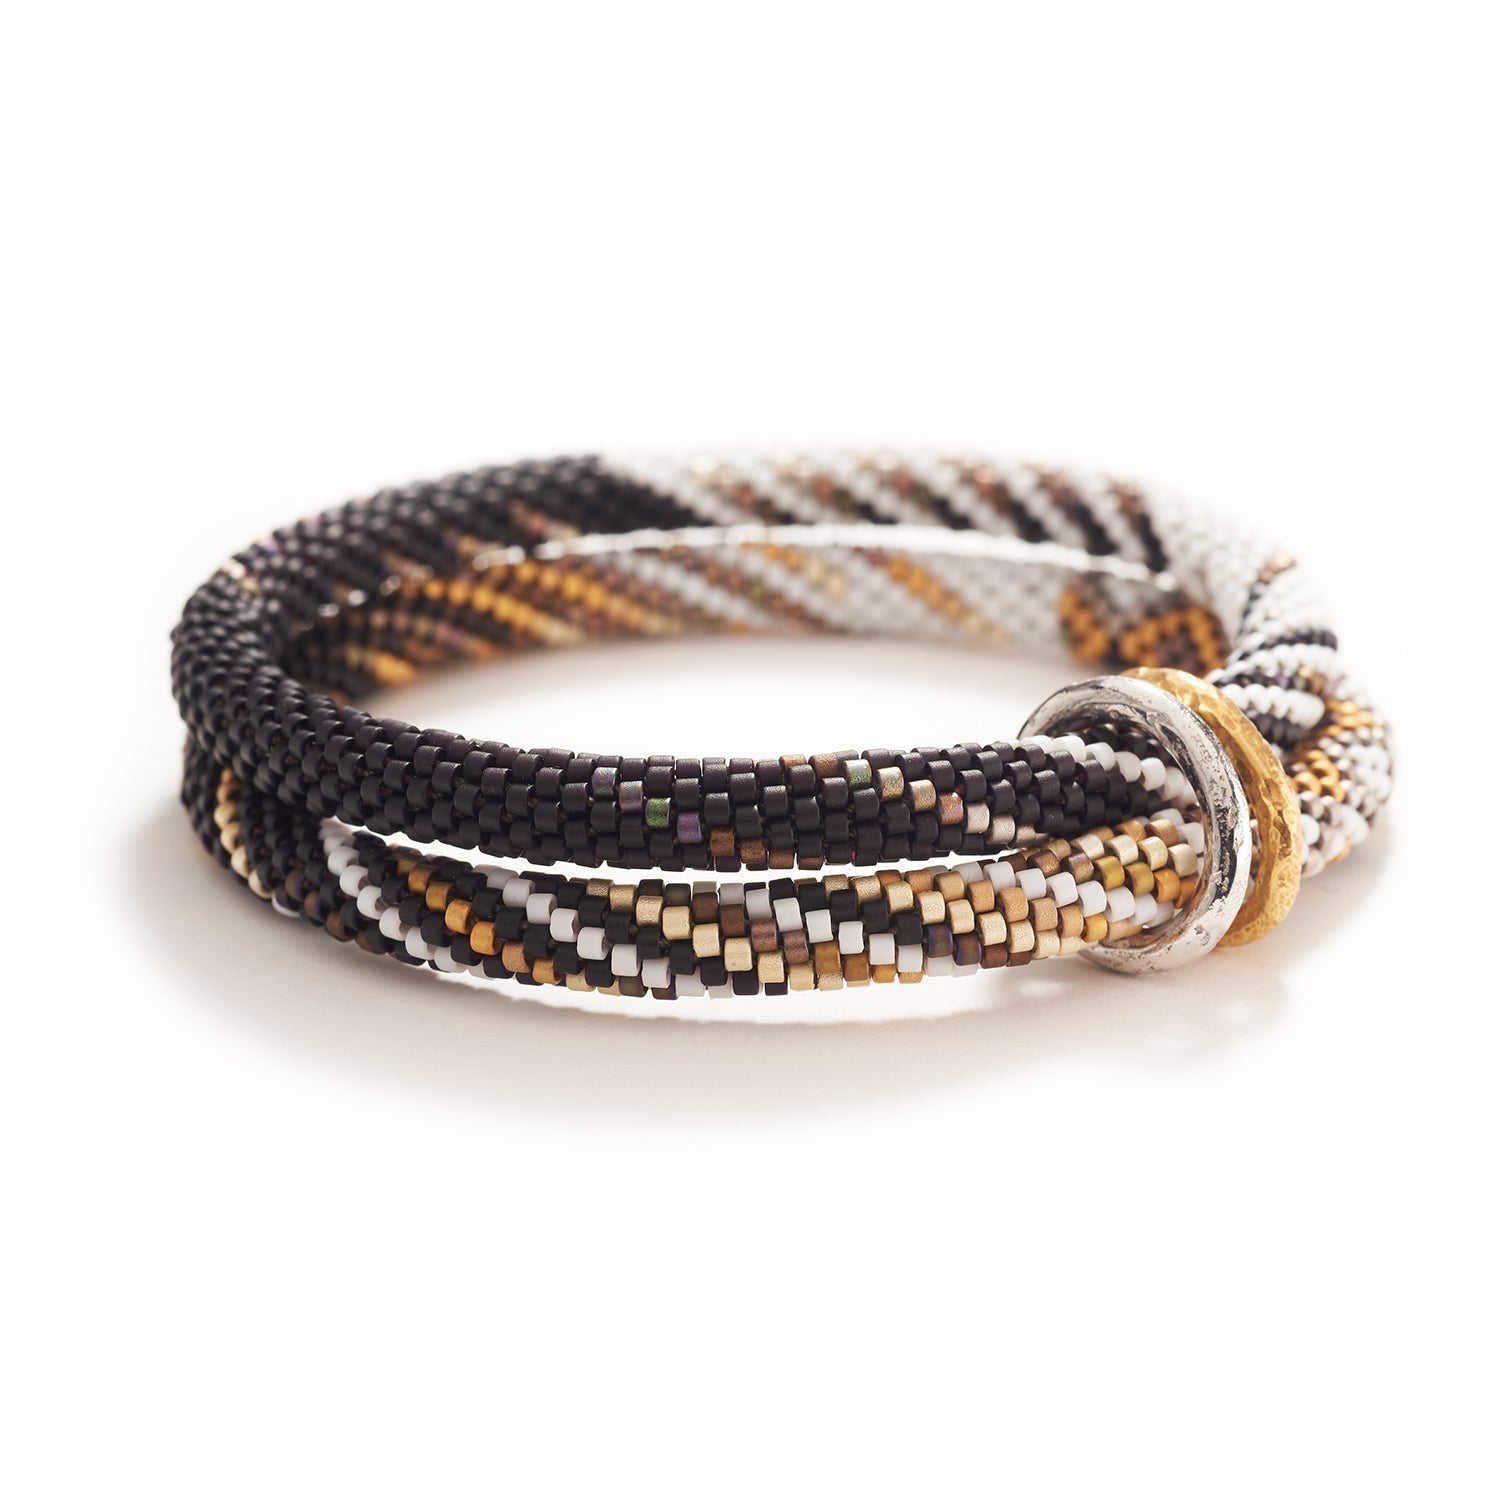 Doubled Harlequin, Chevron, and Twist Bracelet with Gold